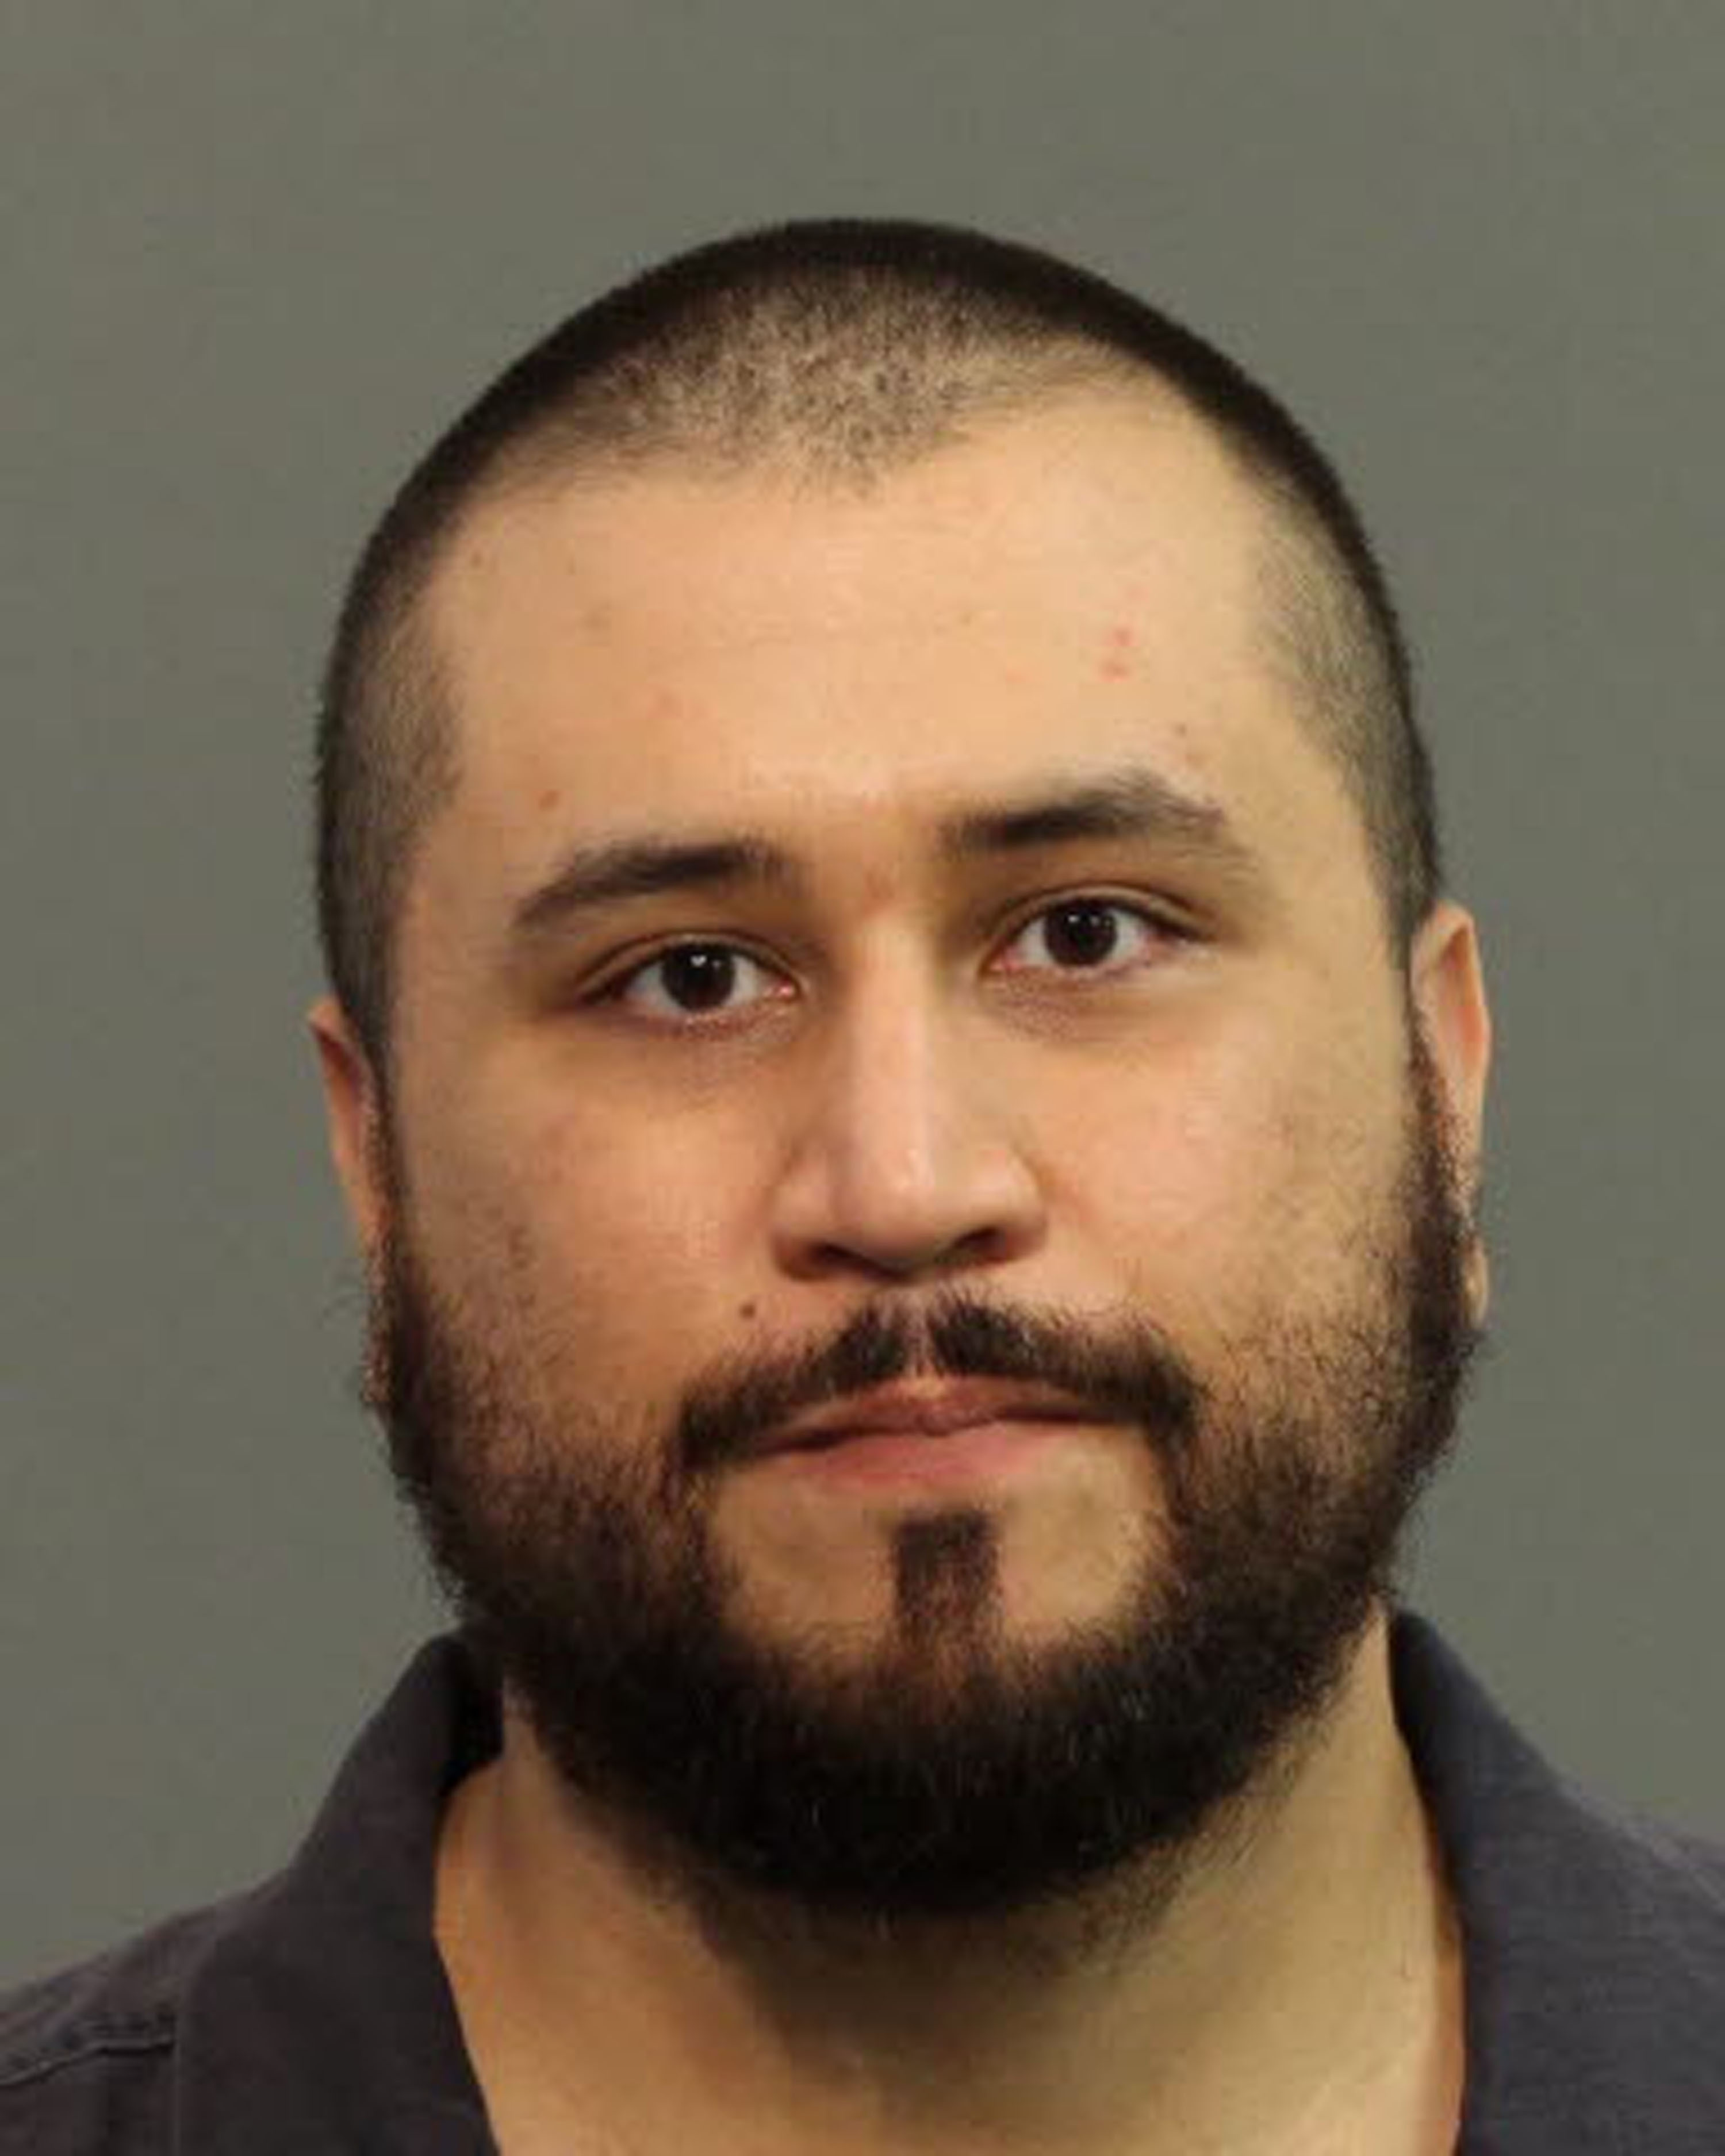 George Zimmerman after being booked into jail today in Florida.